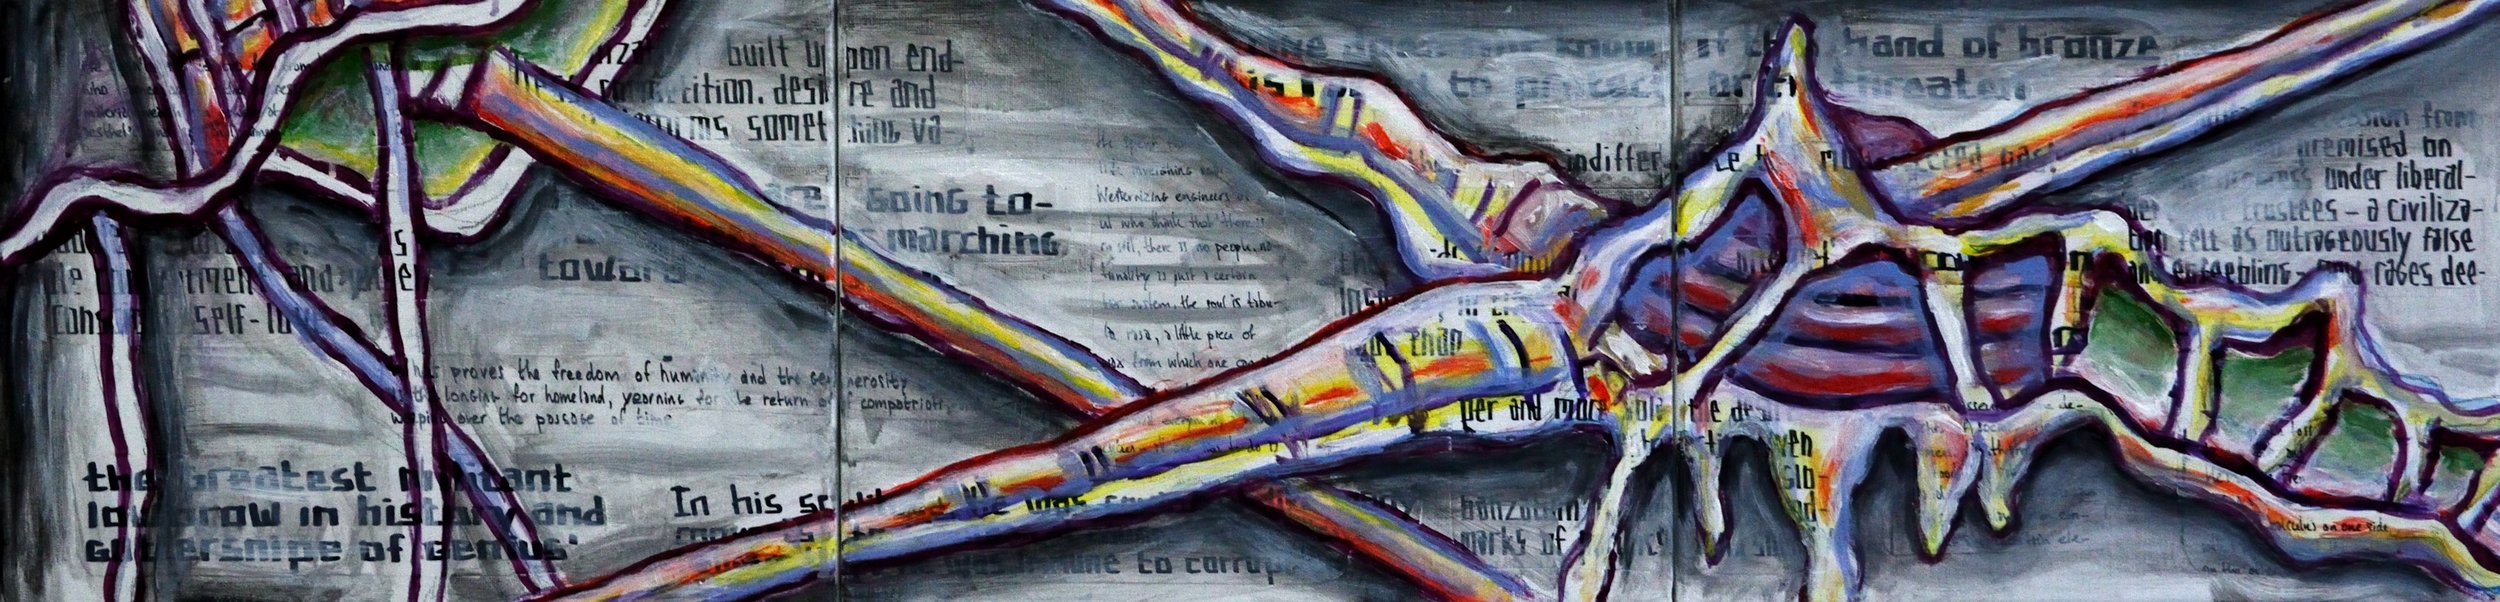 Triptych BZ, That Hand of Bronze was Immune to Corruption, acrylic, collage and marker on canvas, 30x120cm